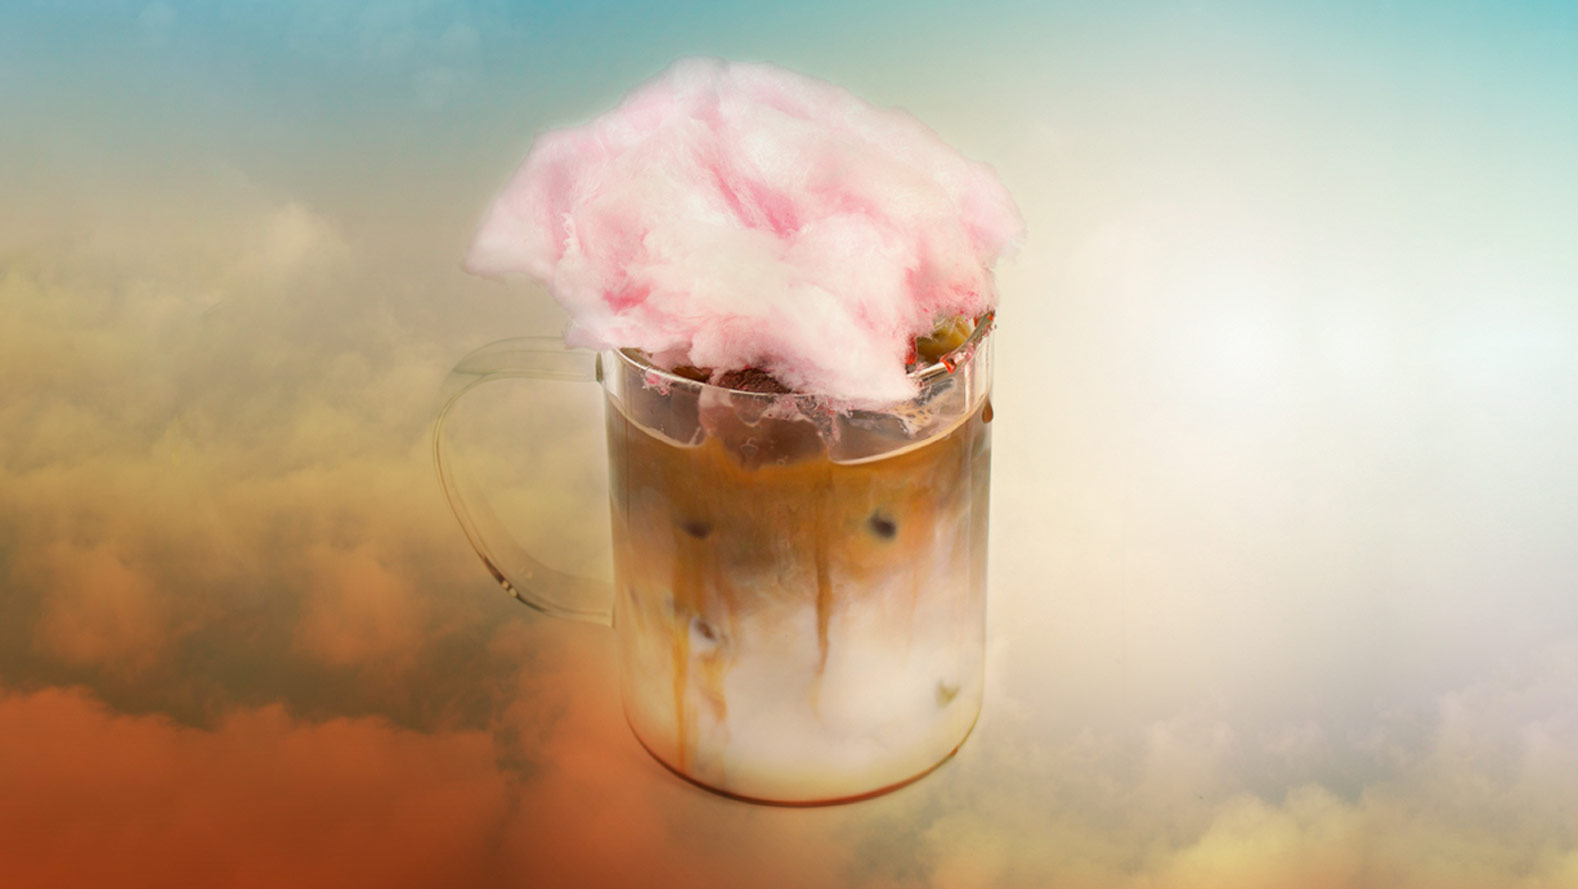 Candy floss iced latte